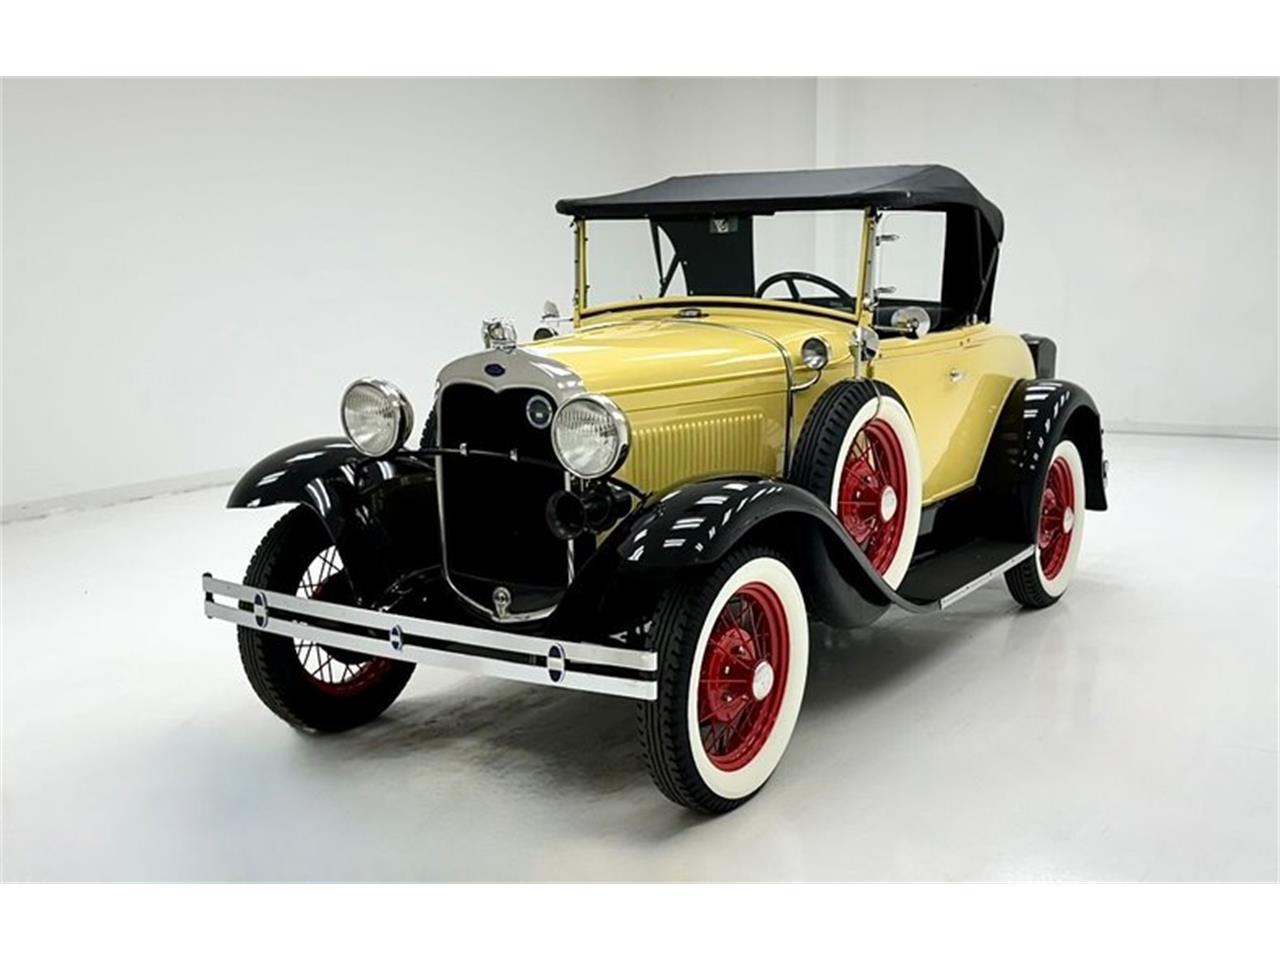 For Sale: 1930 Ford Model A in Morgantown, Pennsylvania for sale in Morgantown, PA